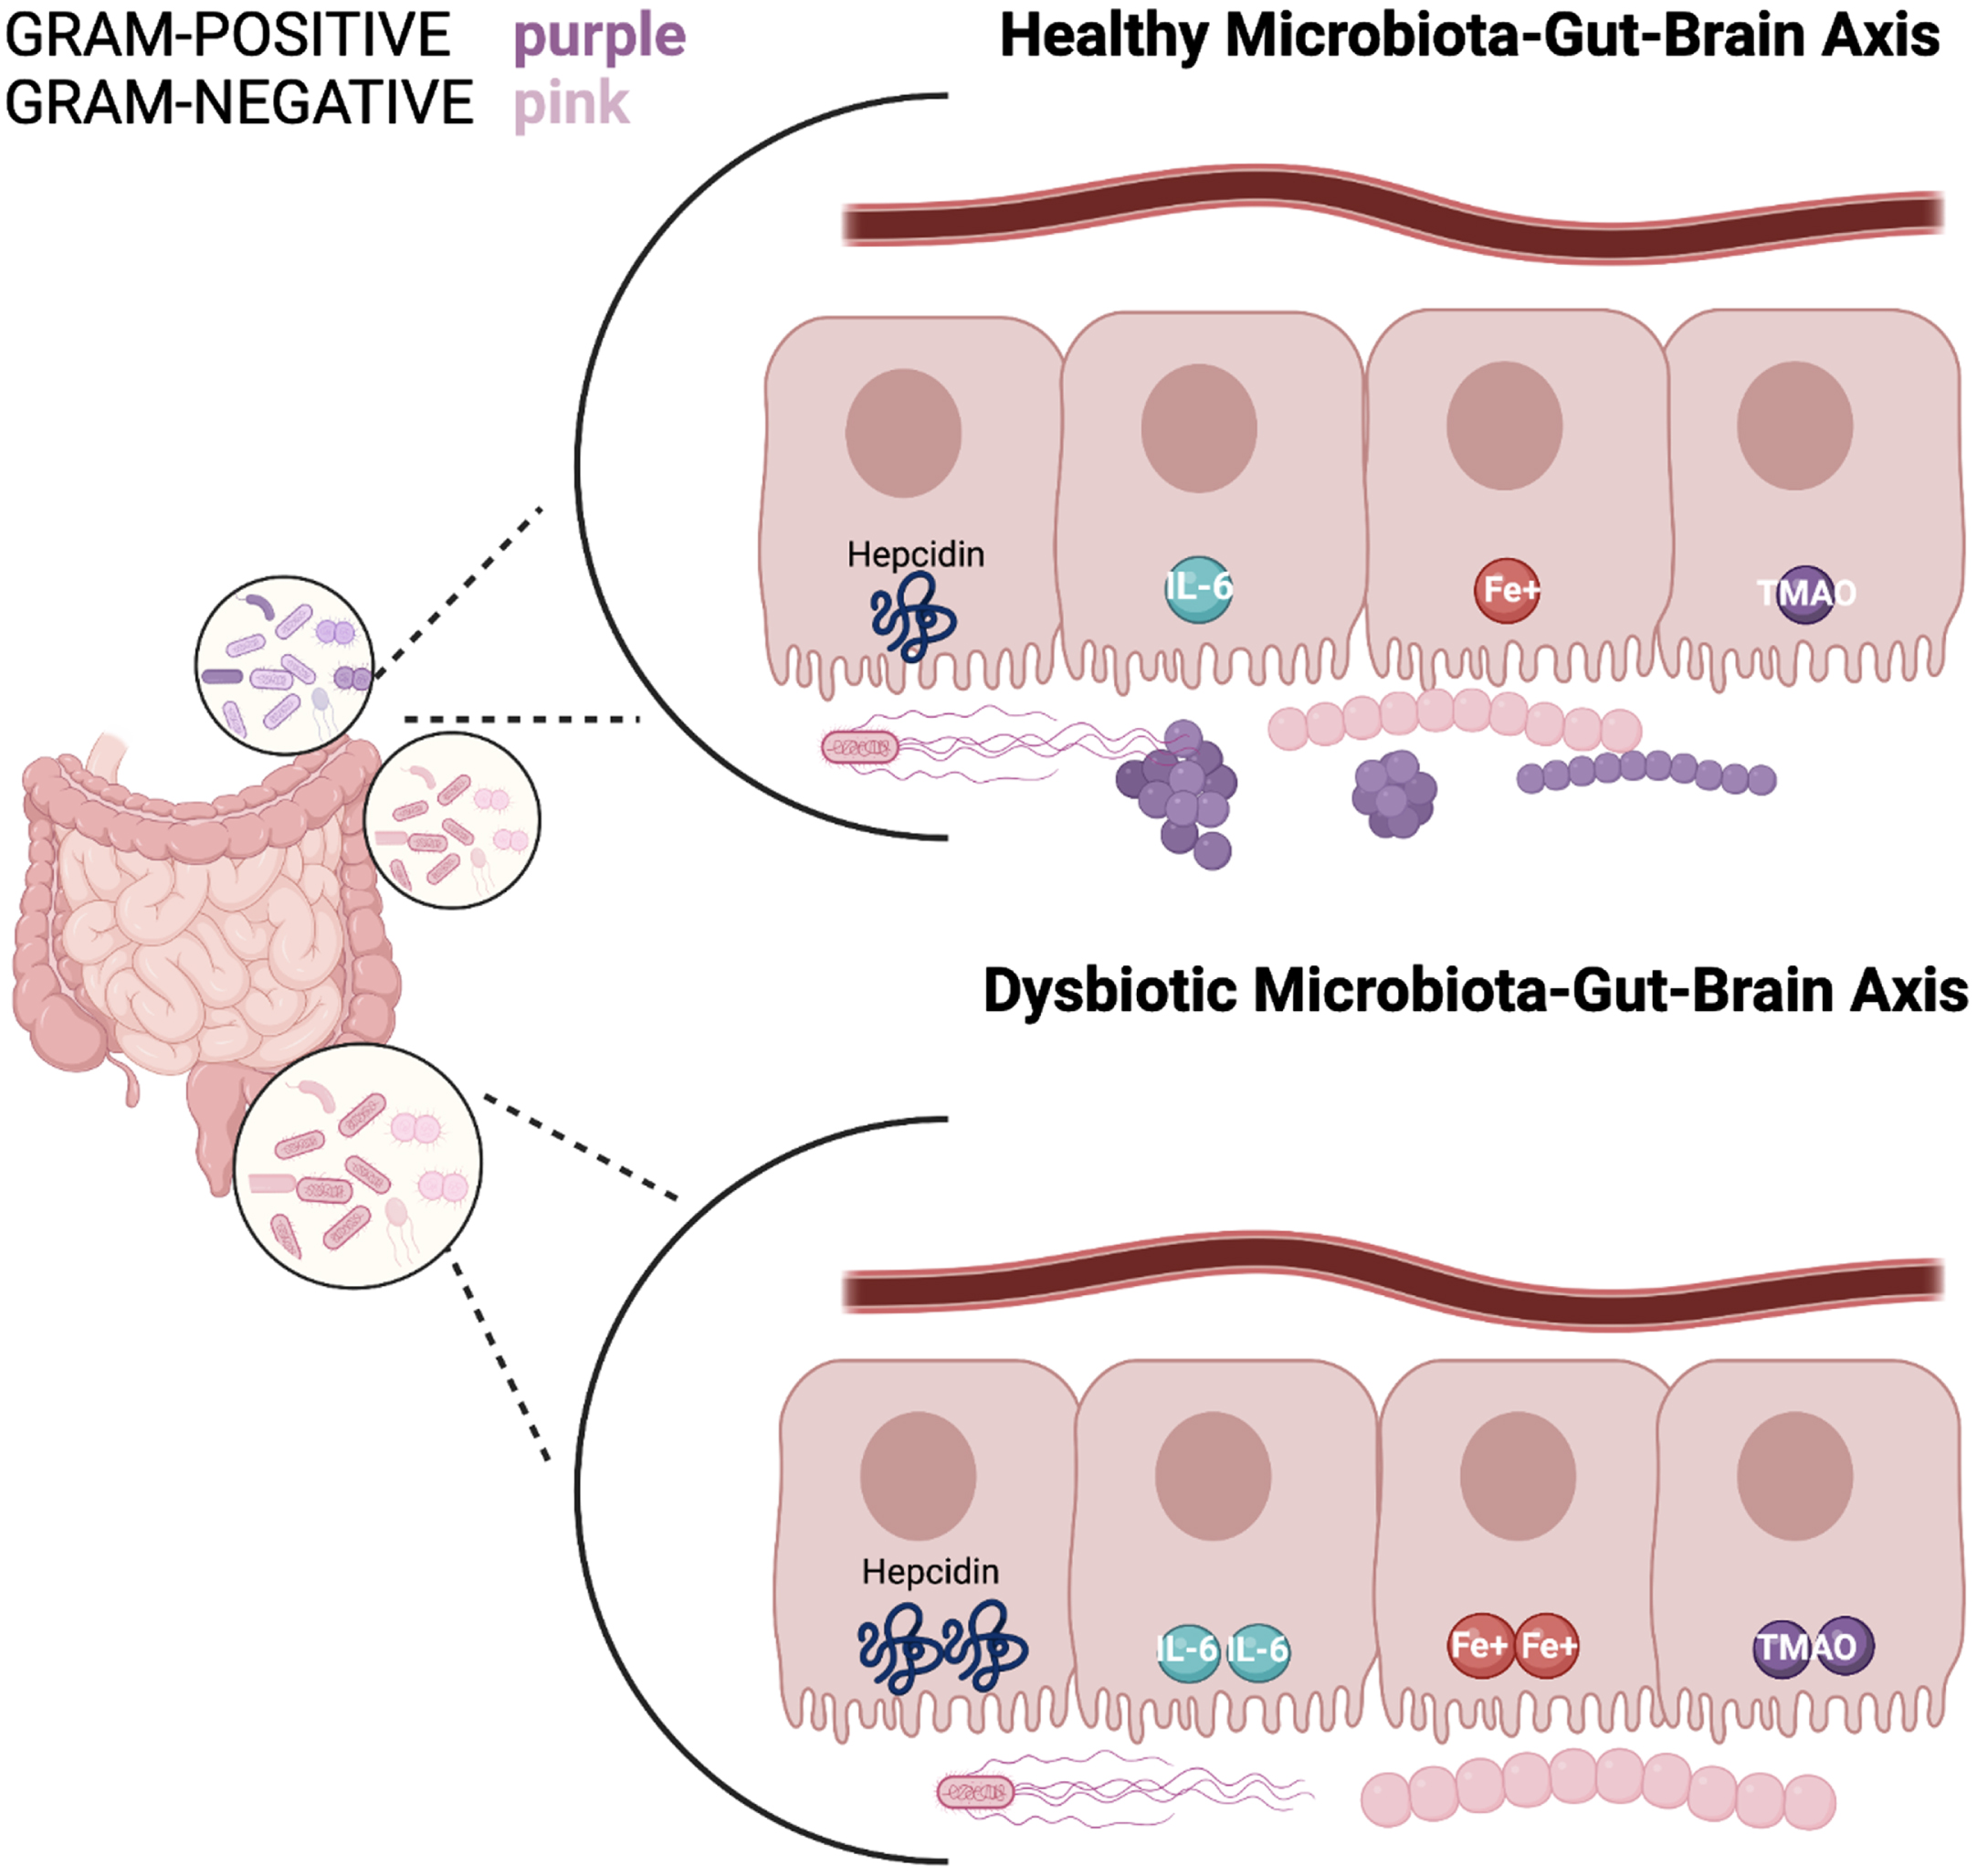 A healthy microbiota consists of a balance of Gram-positive and Gram-negative bacteria; in which hepcidin, iron (Fe3+), IL-6, and TMAO levels express a normal state of balance. Whereas a dysbiosis state indicates an increase of gram-negative bacteria and elevated hepcidin levels resulting in excessive iron accumulation. This stimulates high ferritin levels which promotes less cognitive decline and therefore excess hepcidin production. The synthesis of hepcidin is rapidly increased by infection and inflammation in which elevated IL-6 levels initiate a pro-inflammatory cascade. With IL-6 upregulation occurring in the liver, the higher levels of TMA become oxidized to TMAO. Circulation of TMAO initiated in the small intestine initiates an inflammatory state.